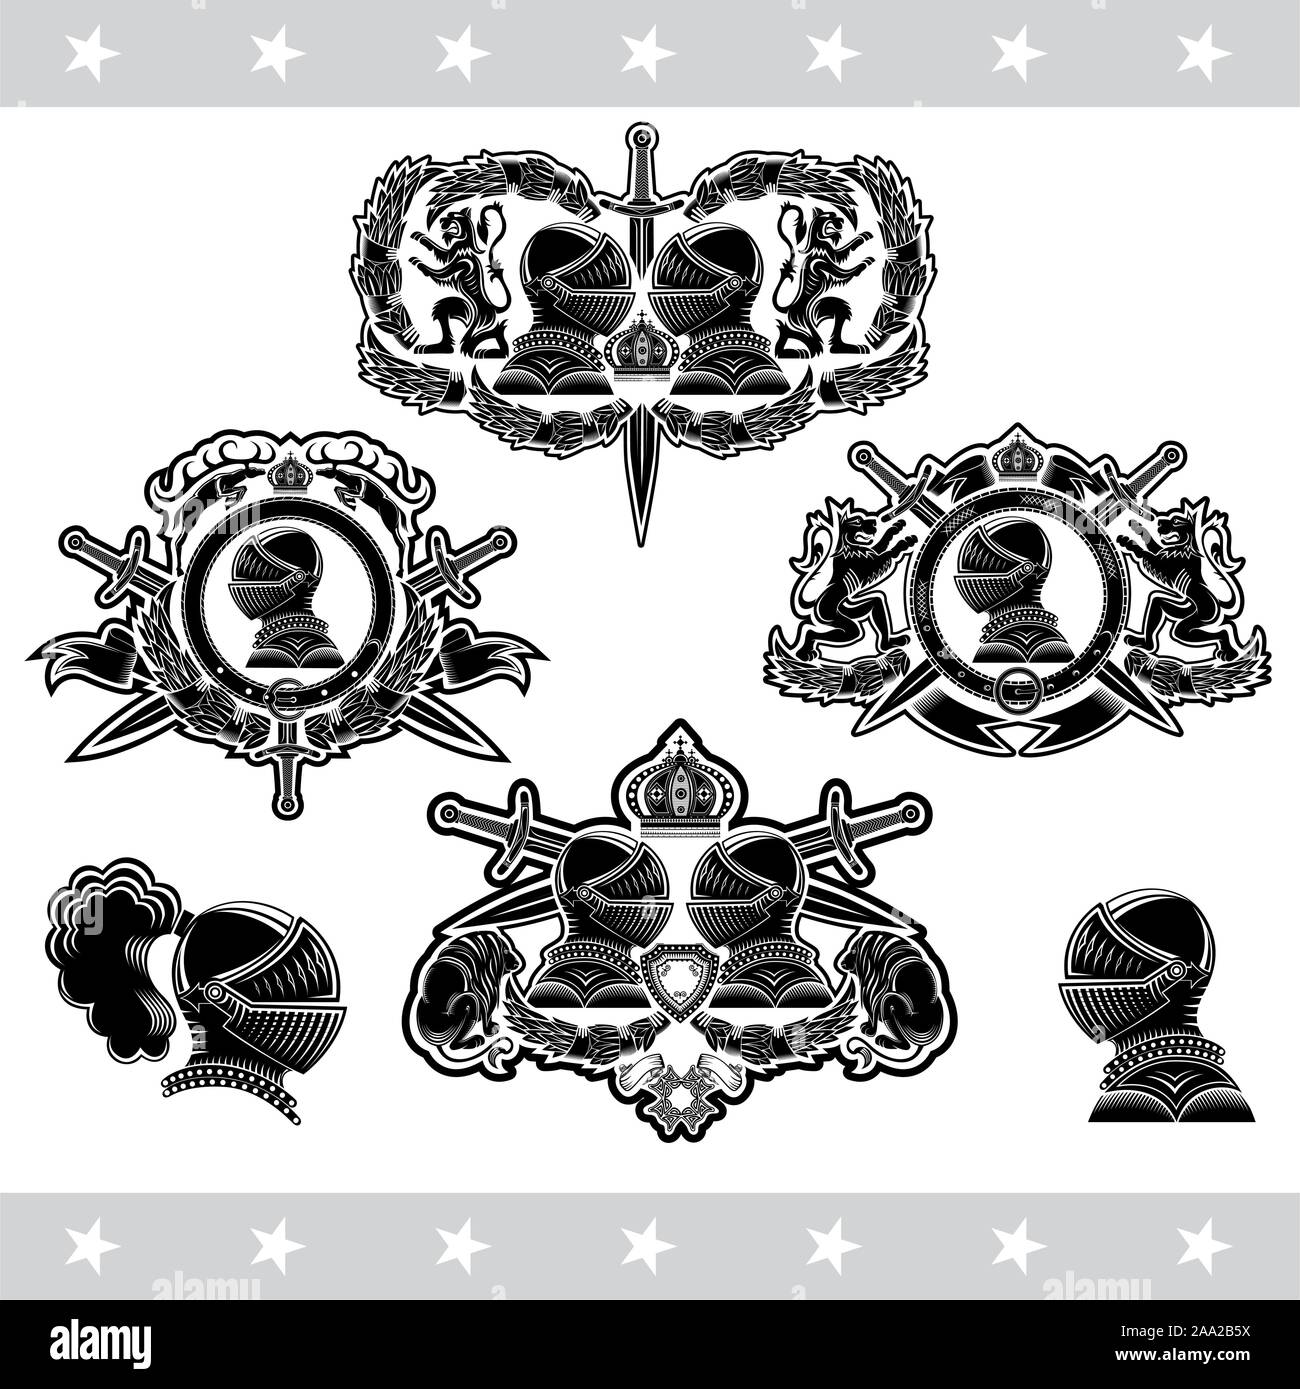 Set of heraldic vintage label on white with knight helmets, swords, lions and laurel wreath. Stock Vector